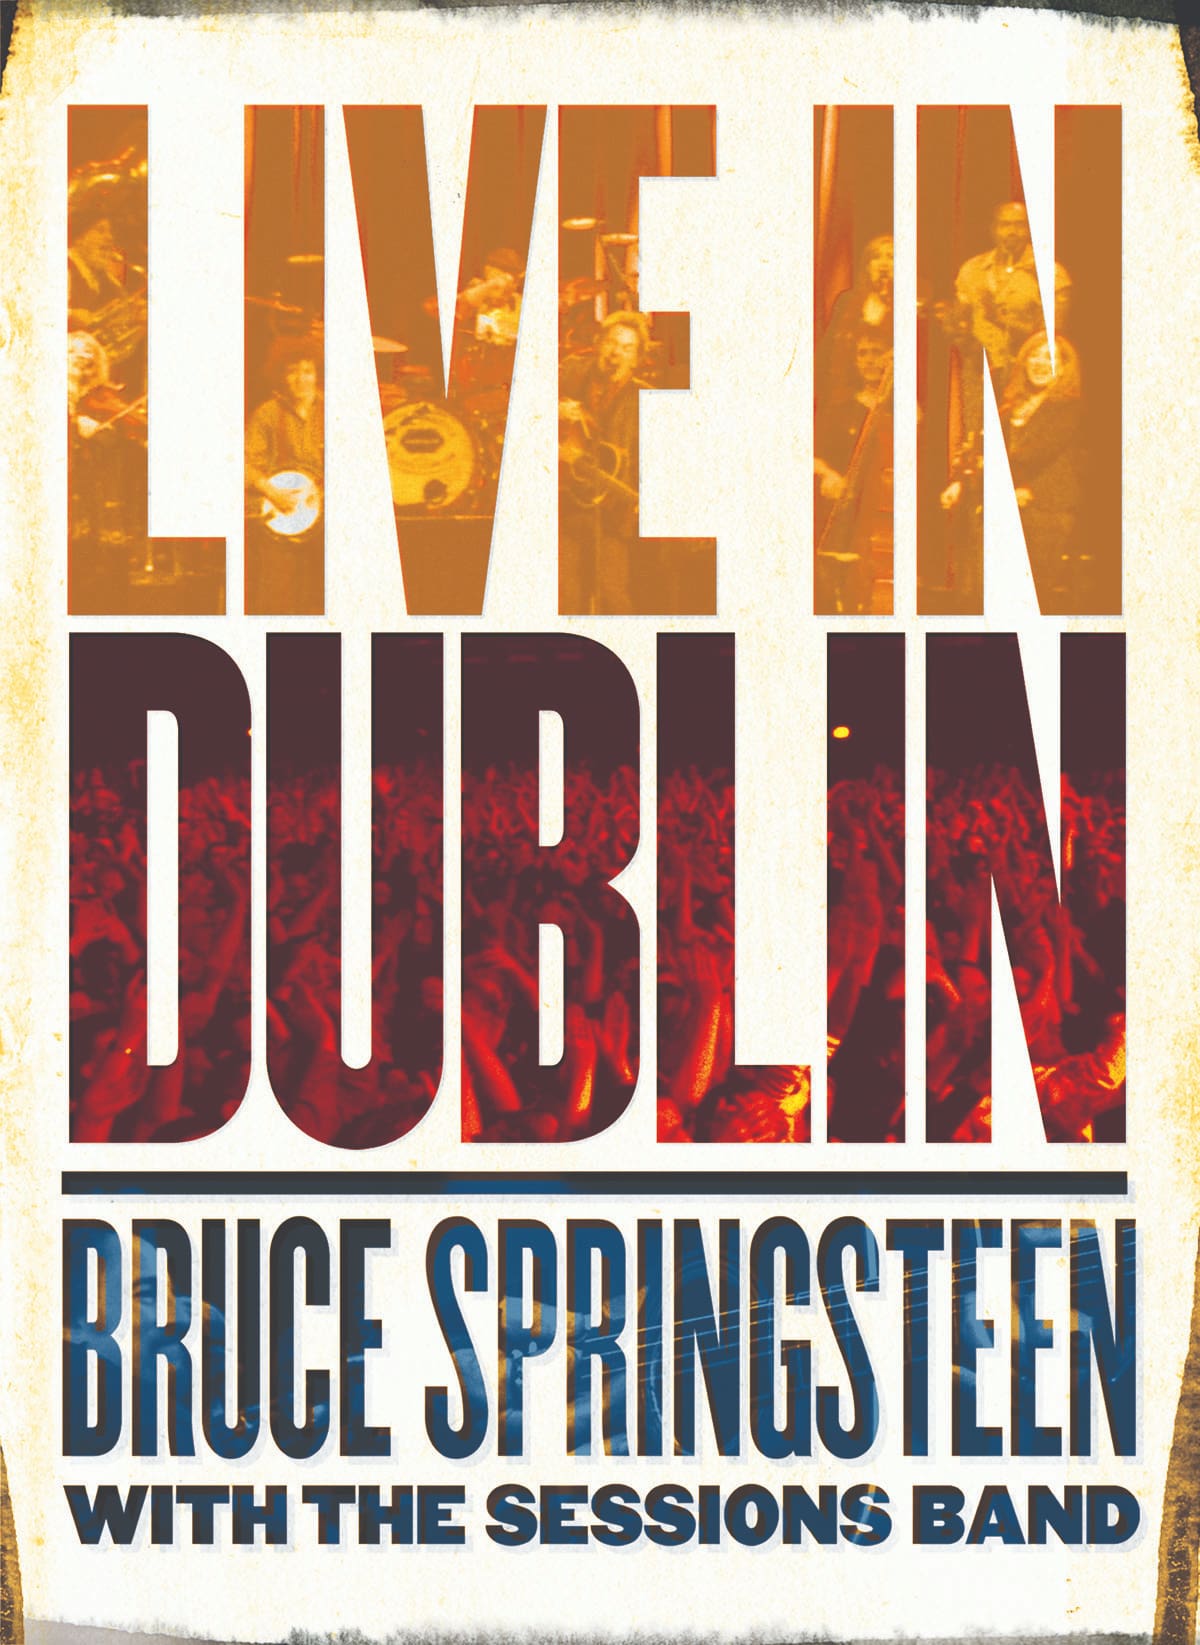 Bruce Springsteen Live in Dublin Film front cover